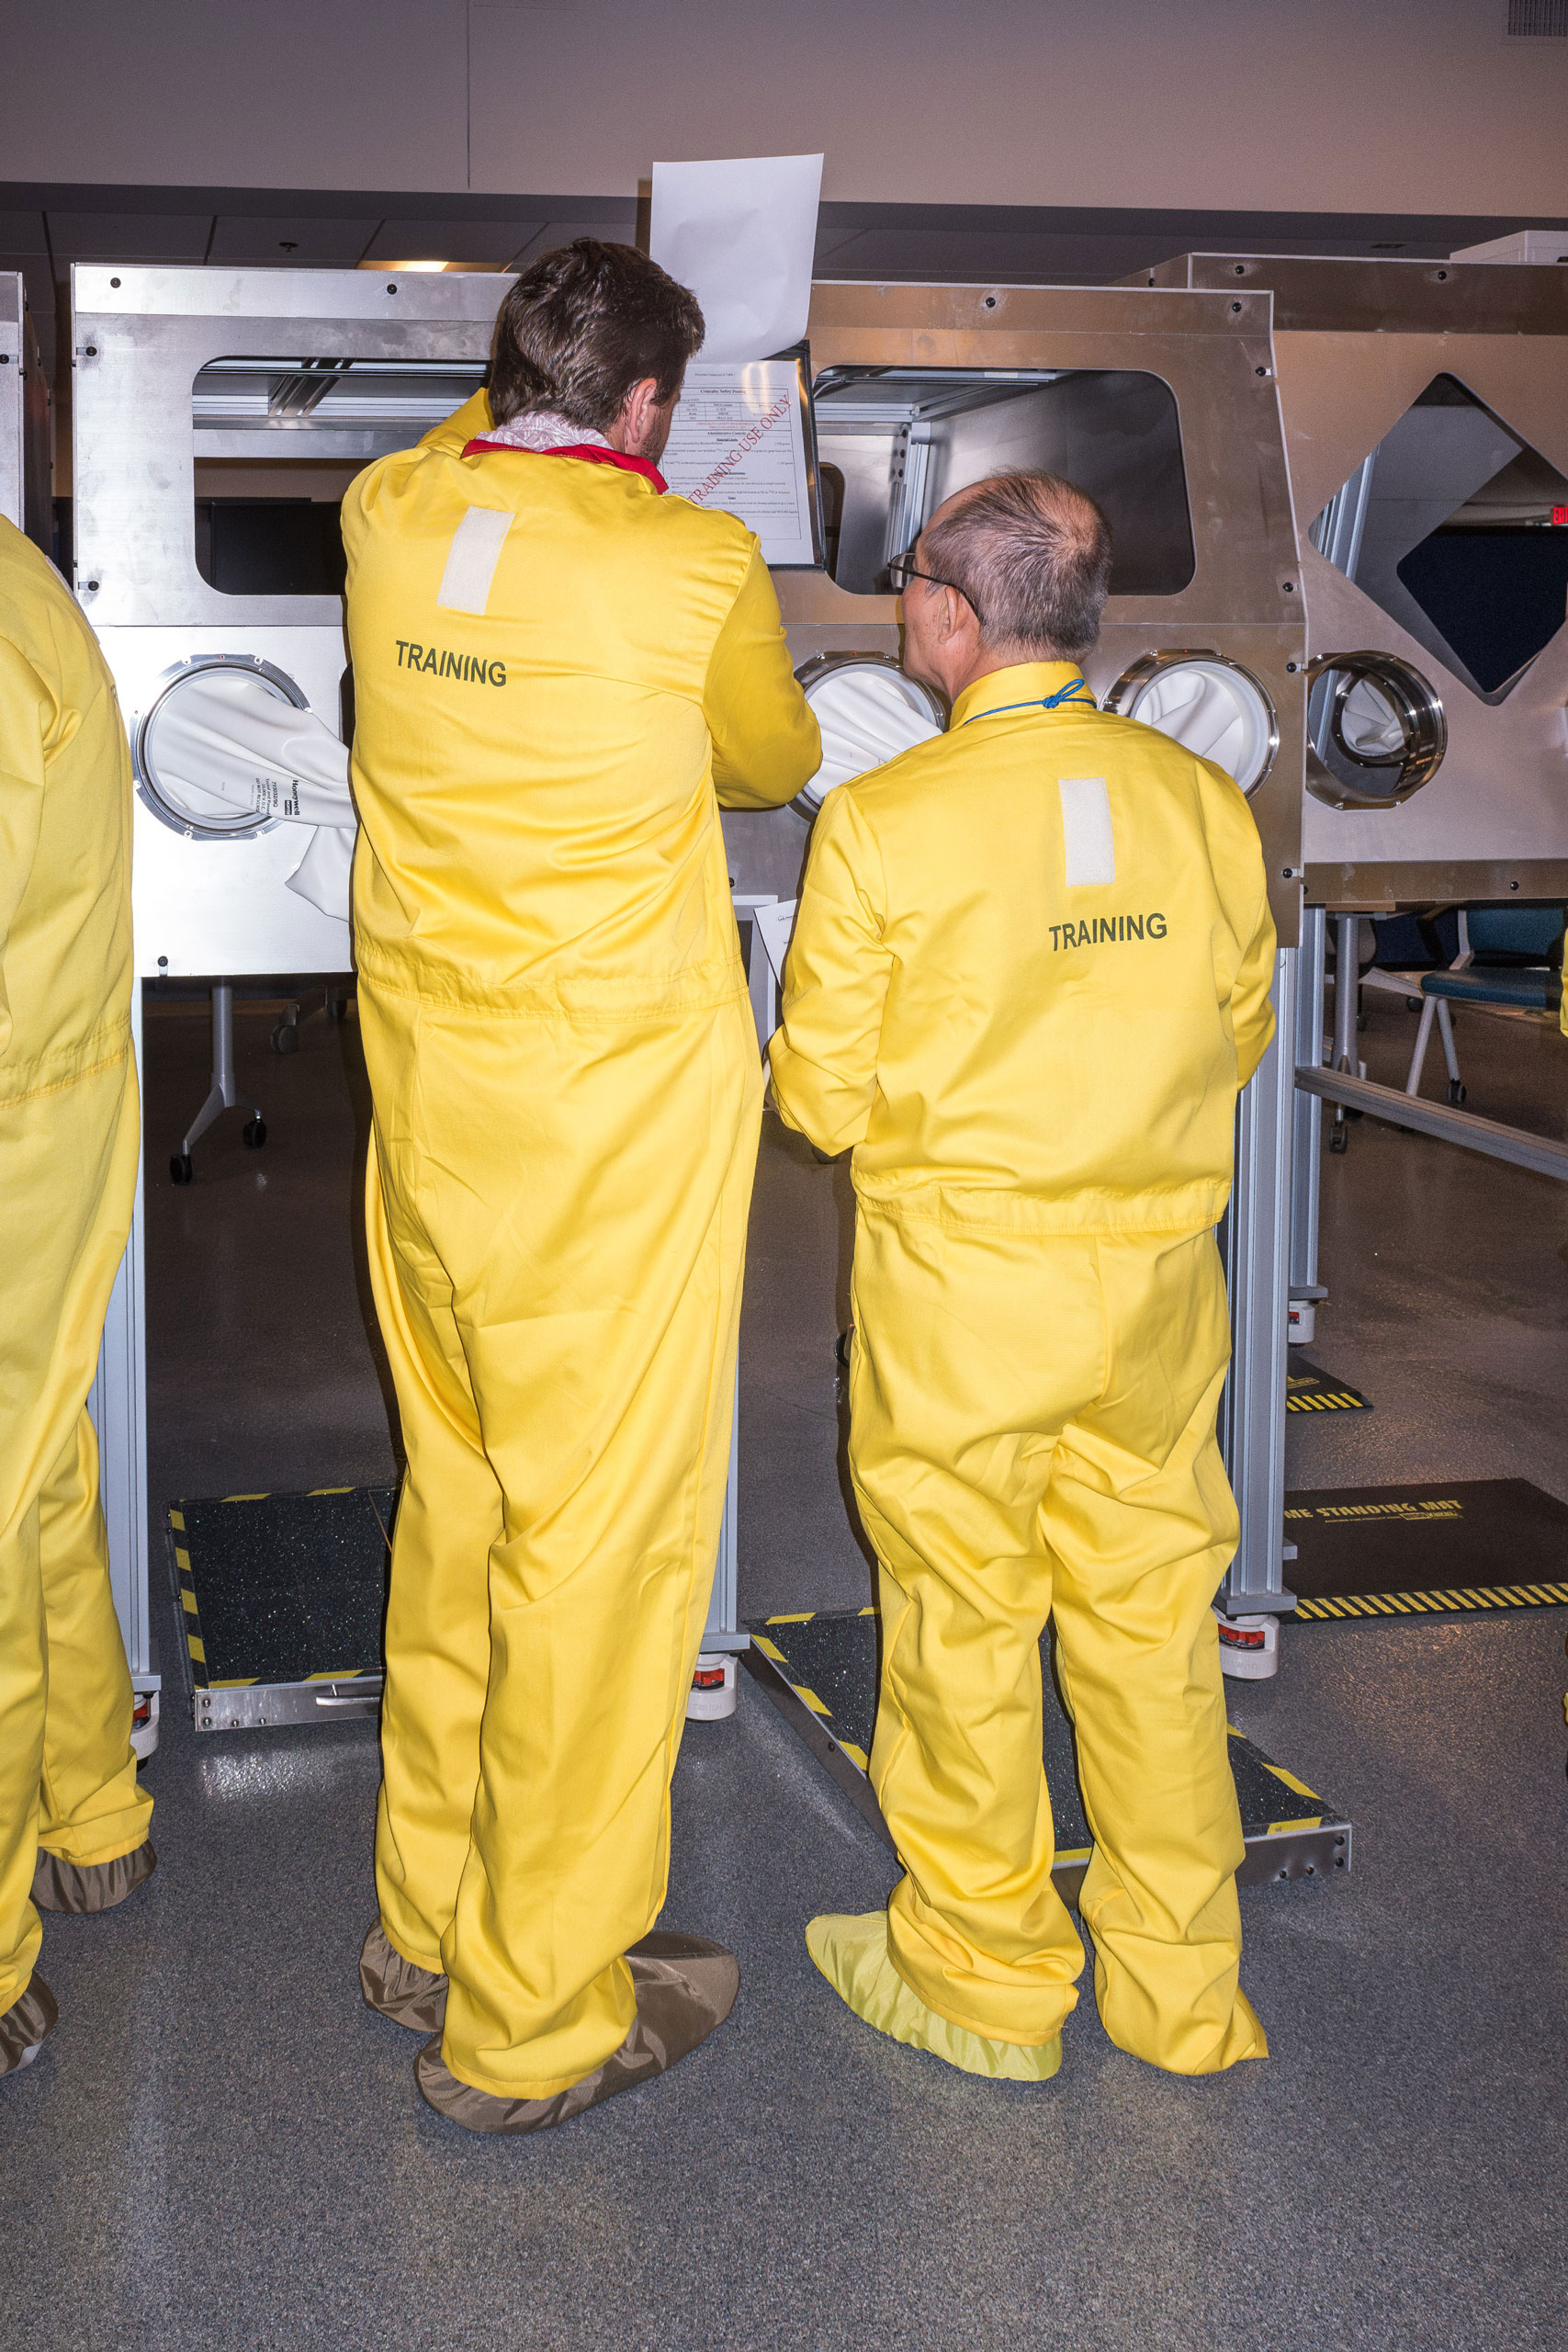 Employees training to use glove boxes to handle plutonium, in the NET facility